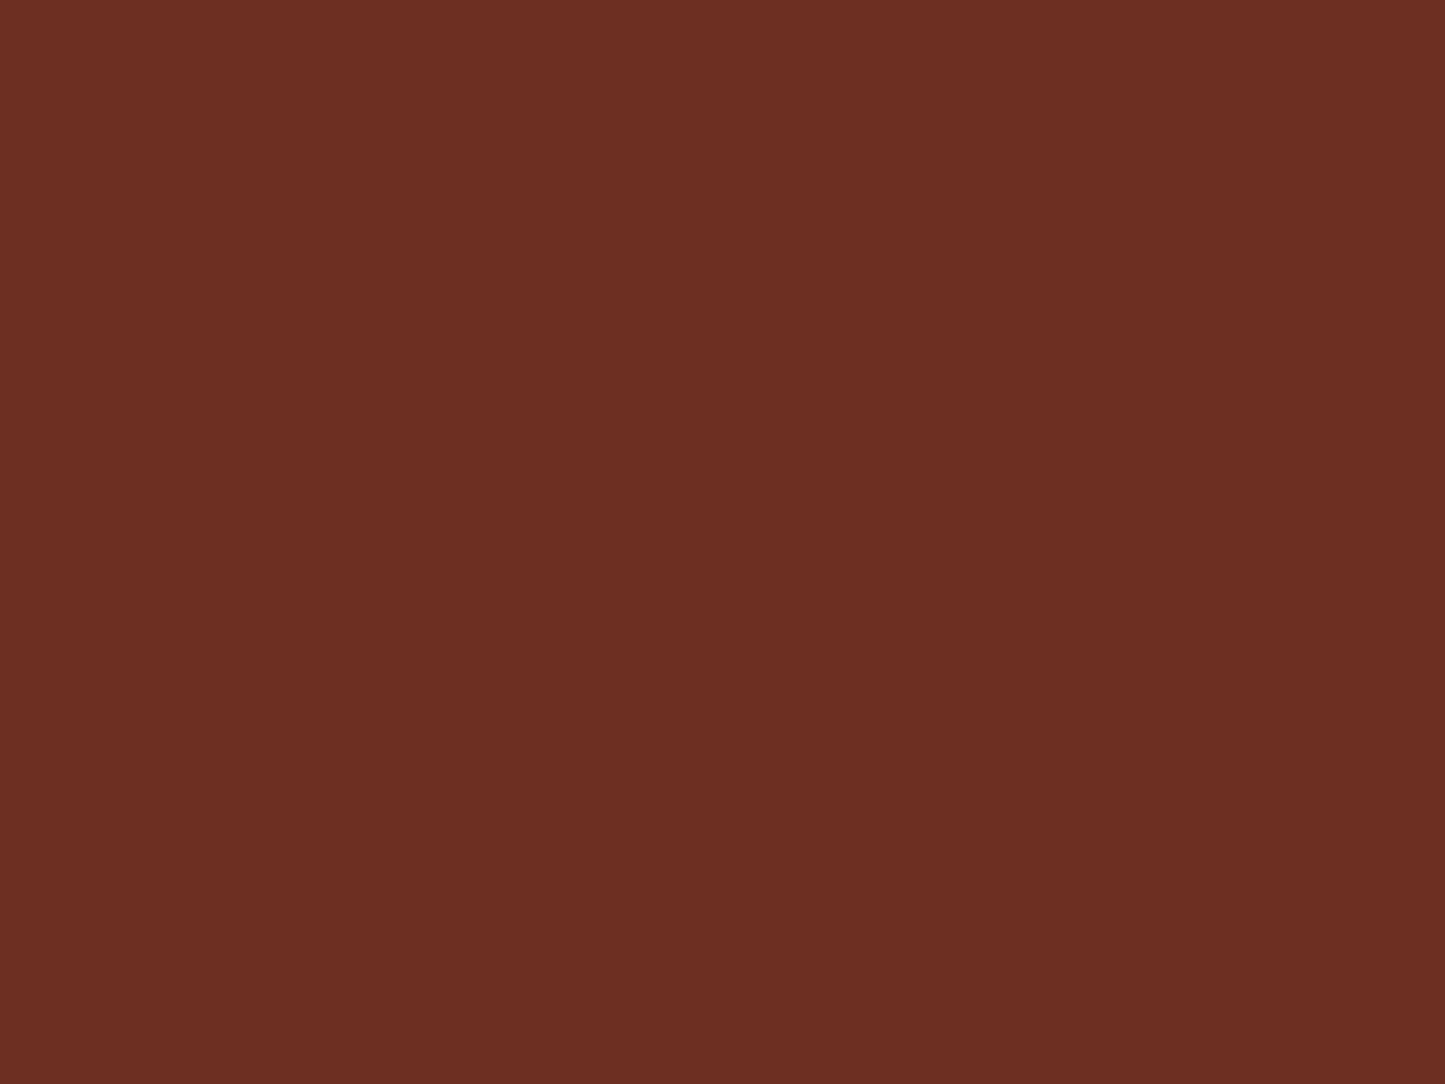 Mixol Oxide Russet Brown Universal Stainer - 20ml